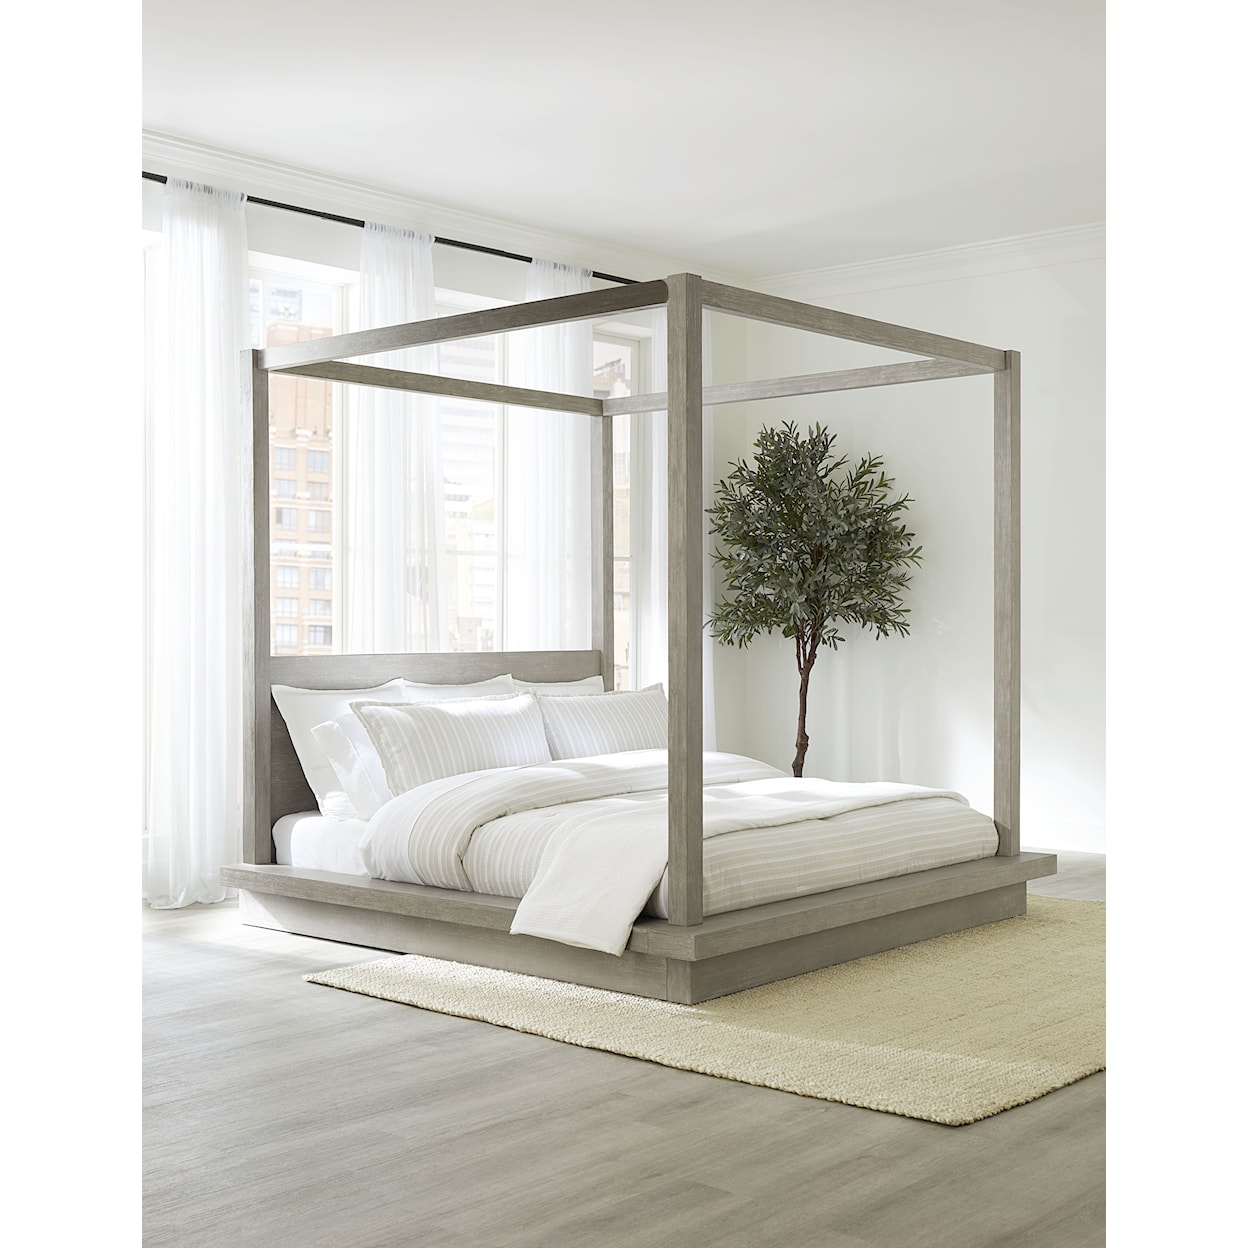 Modus International Melbourne California King Wood Canopy Bed